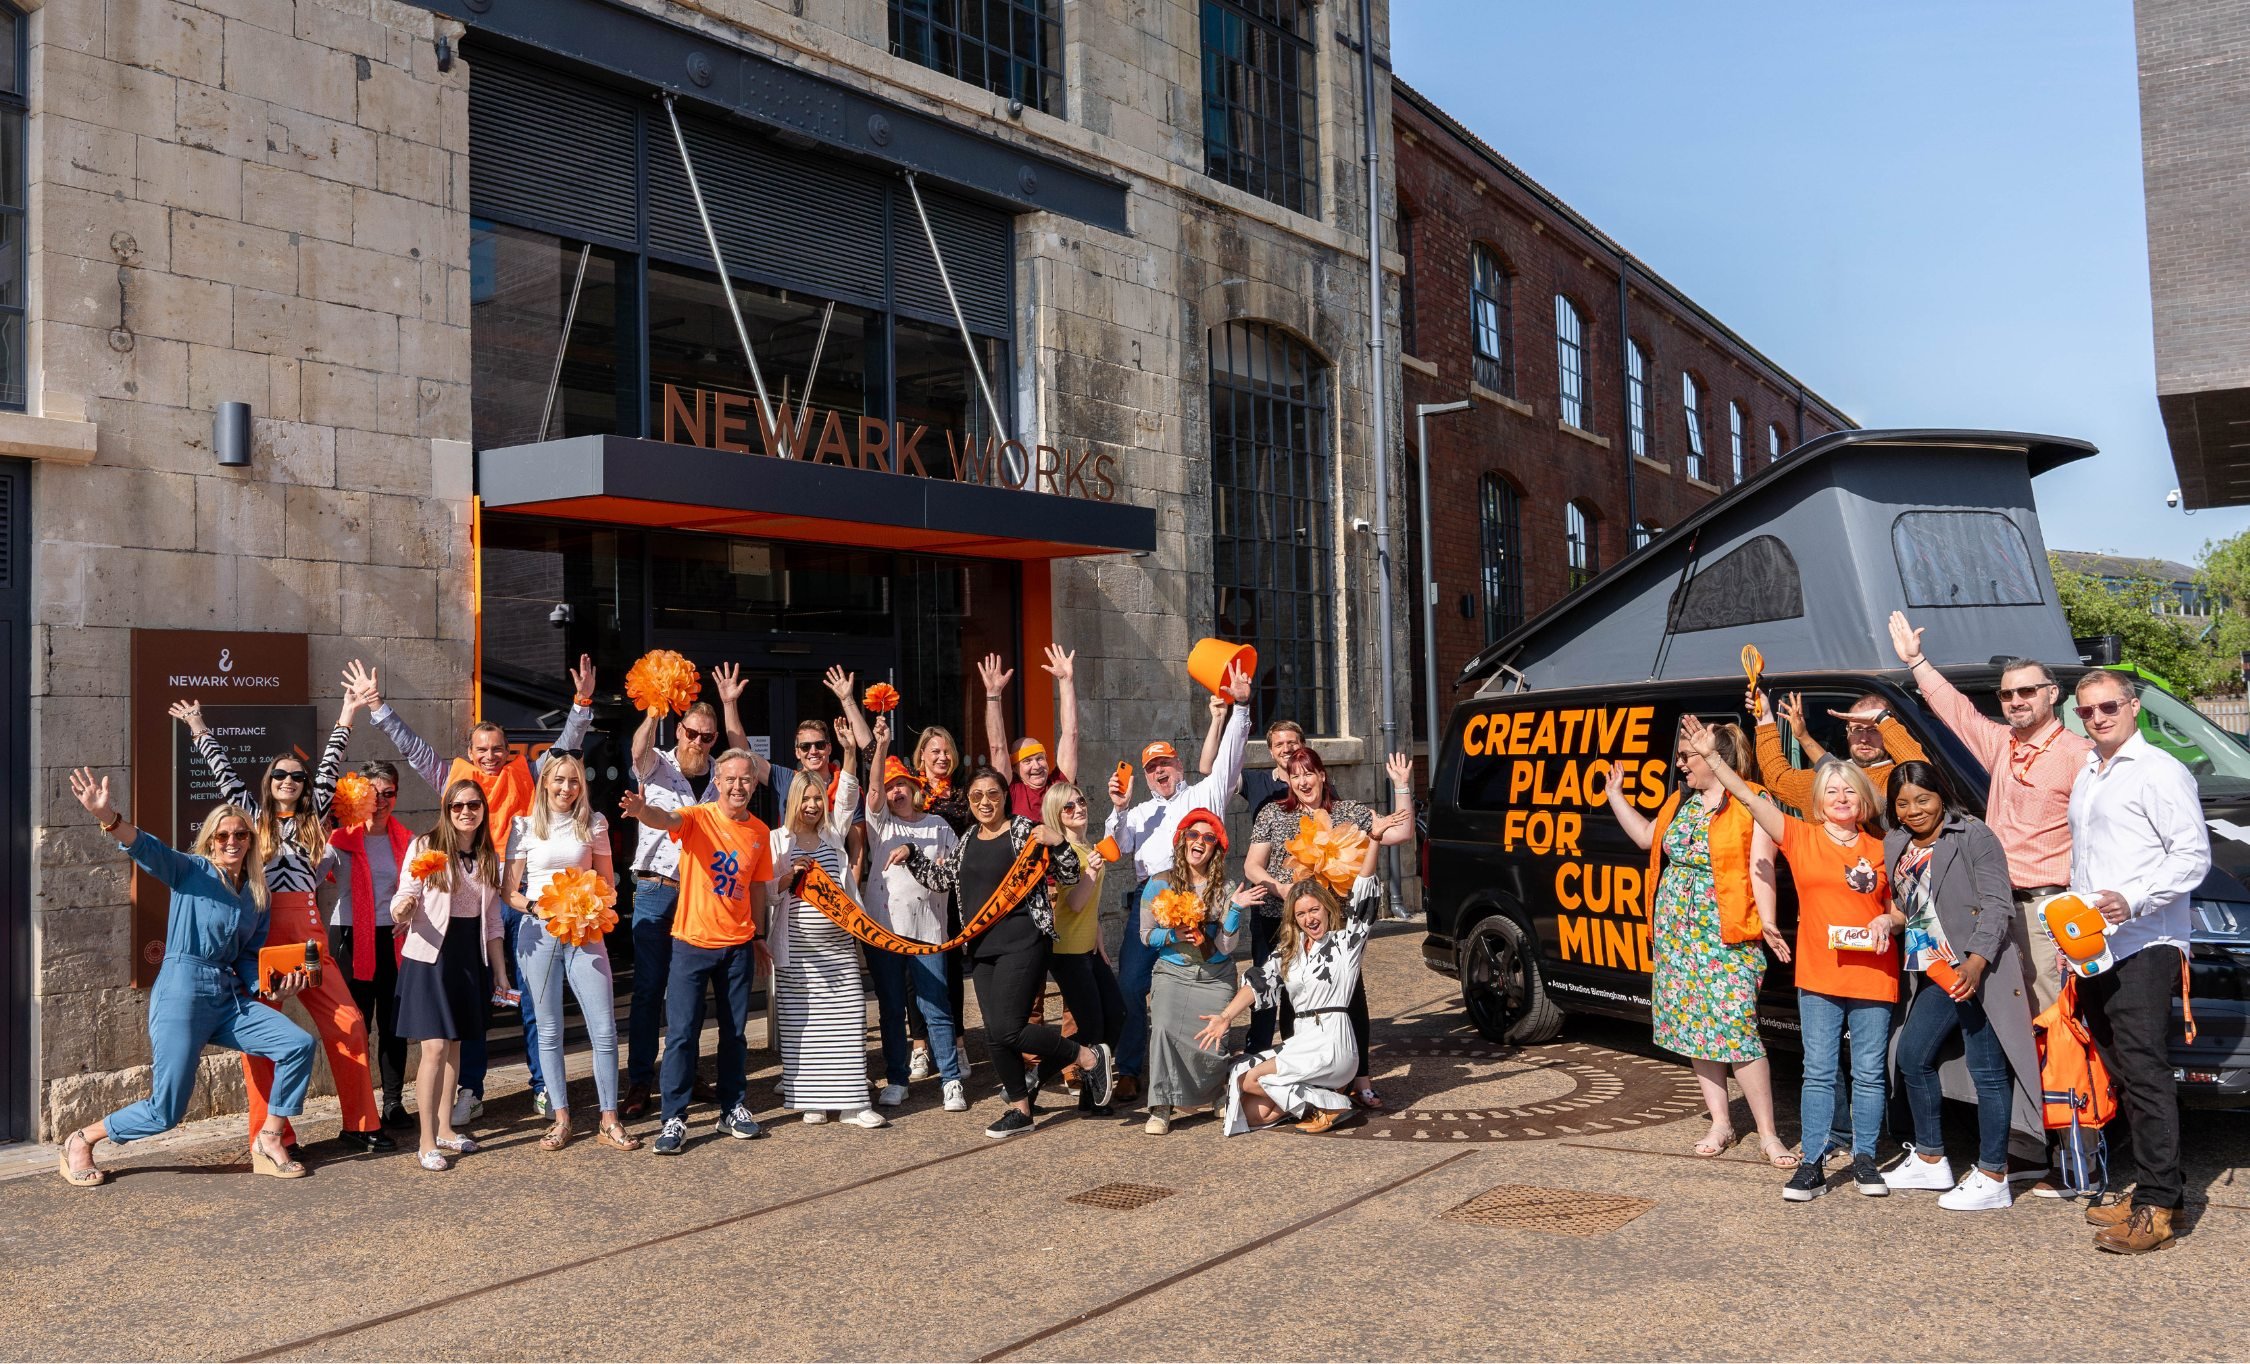 The TCN team pose outside of Newark Works